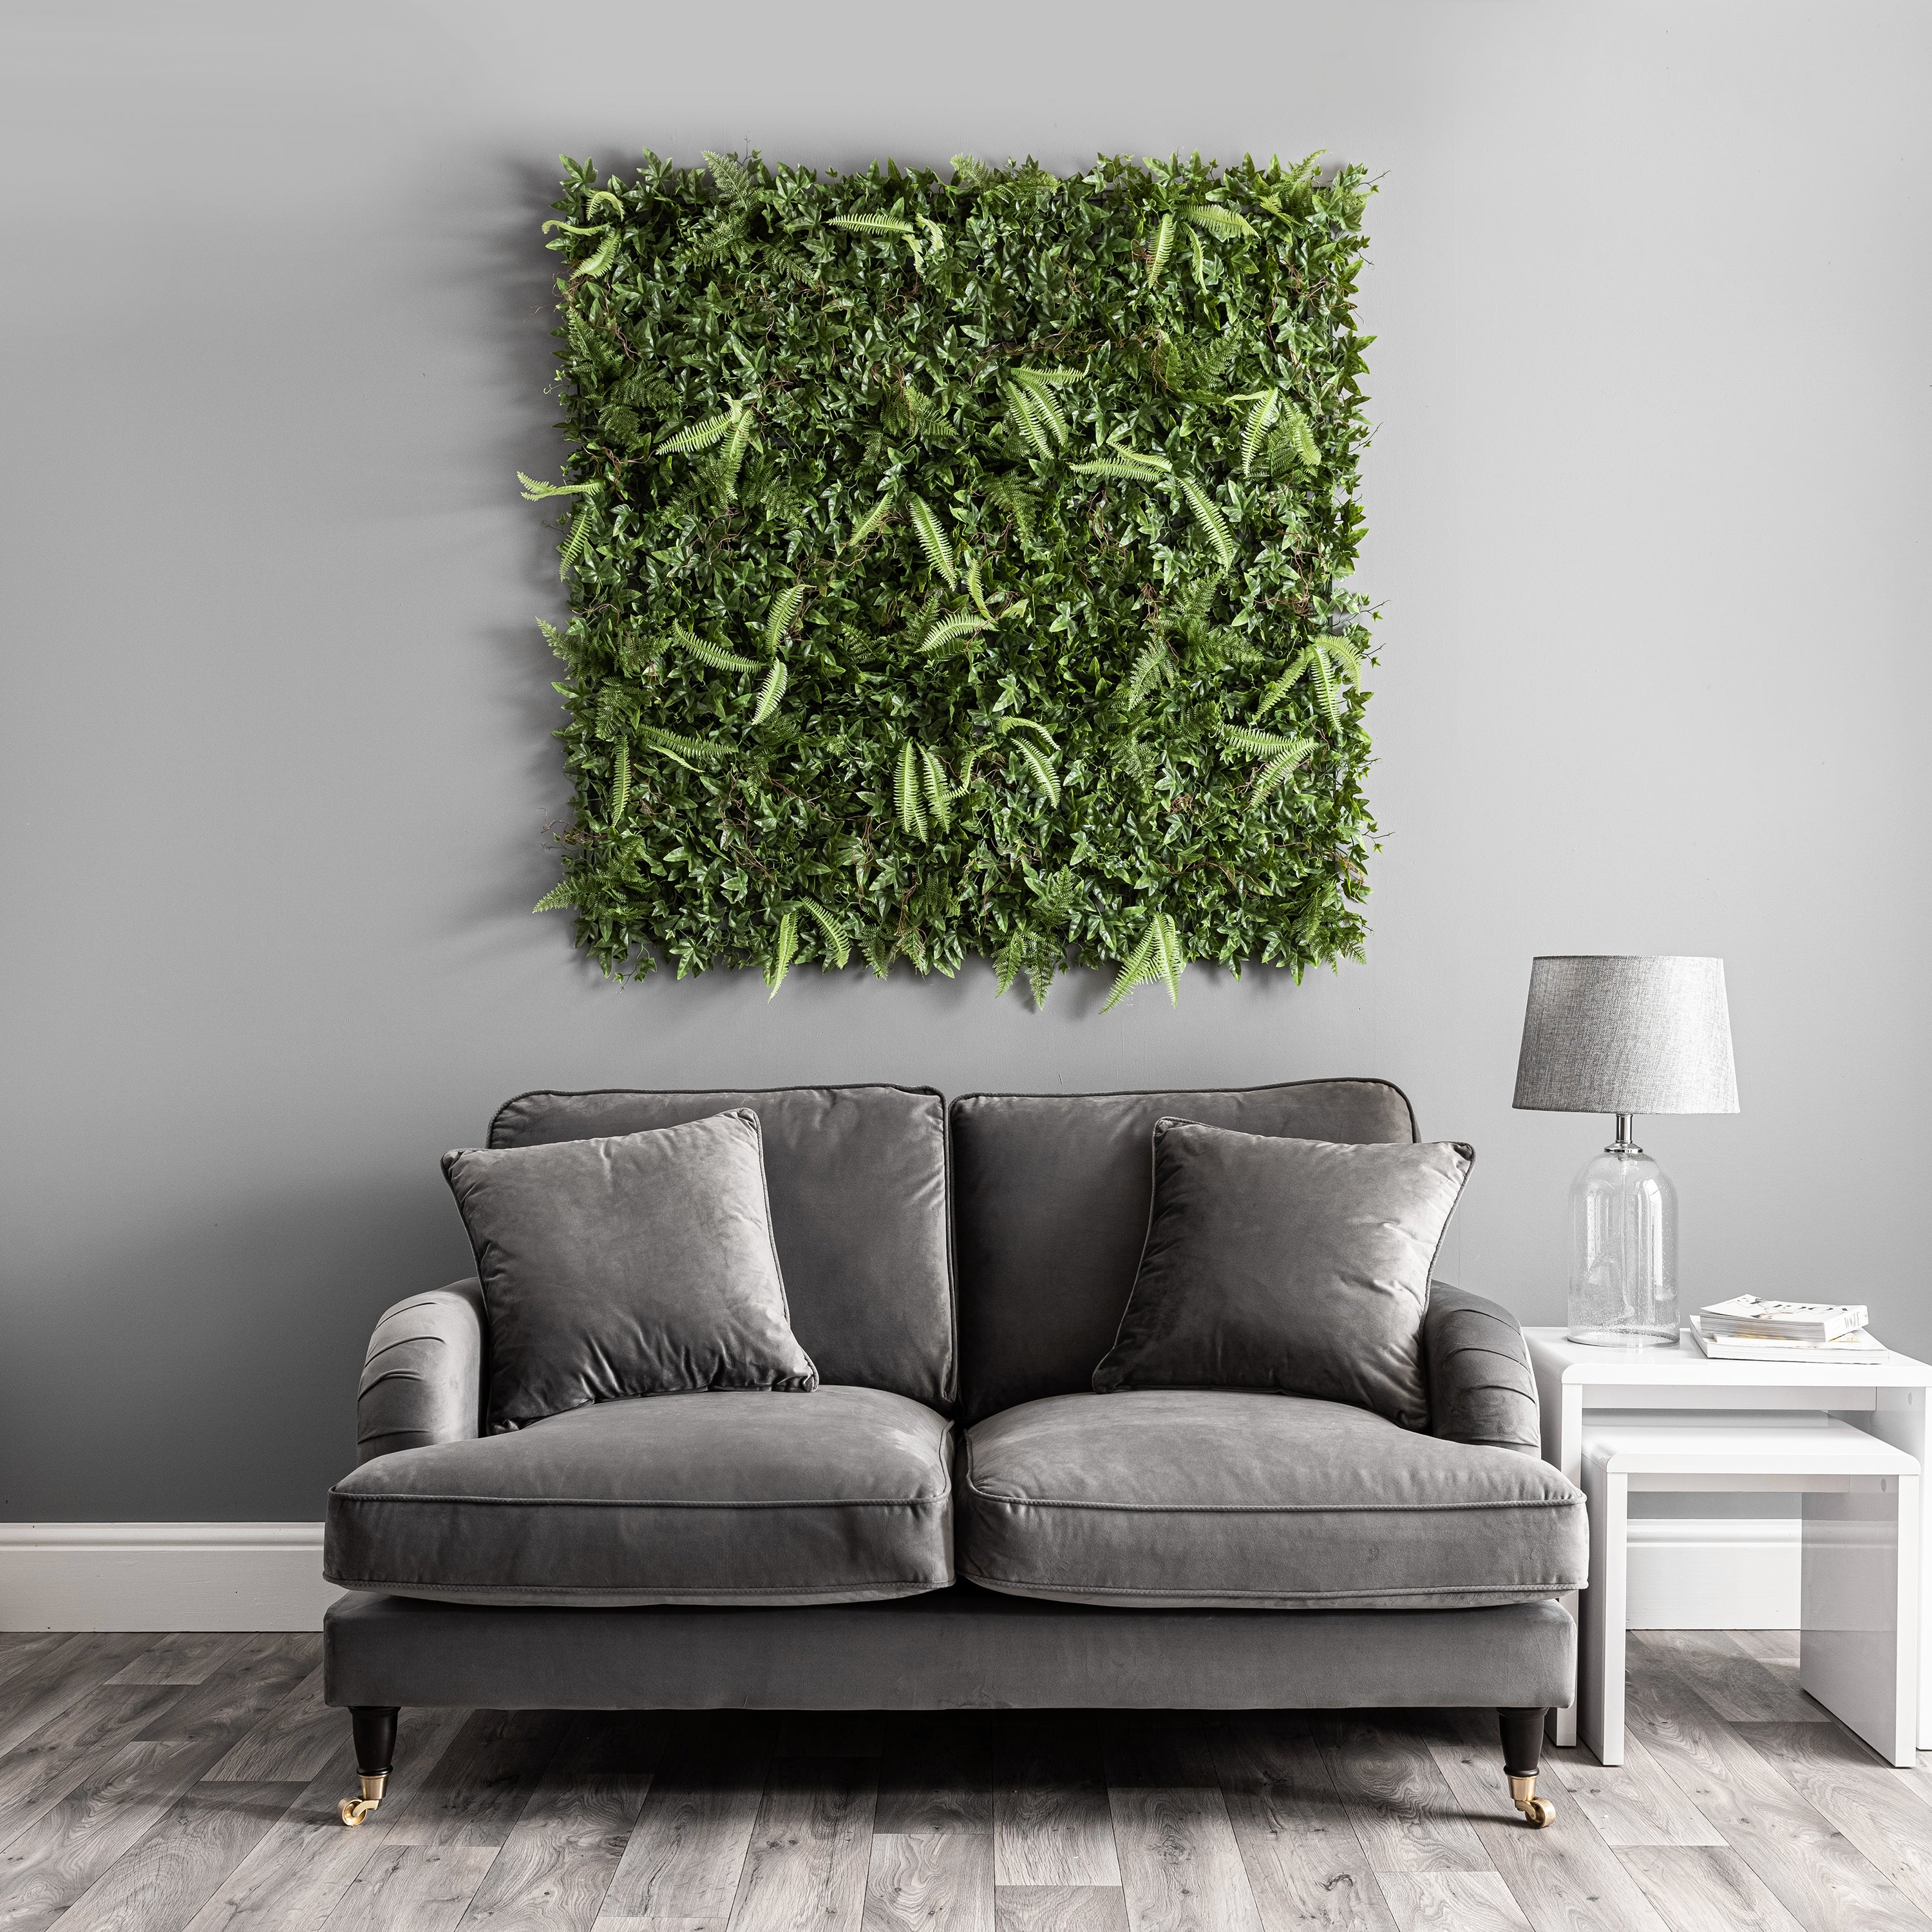 Artificial Vine Wall - An Easy and Inexpensive Room Upgrade